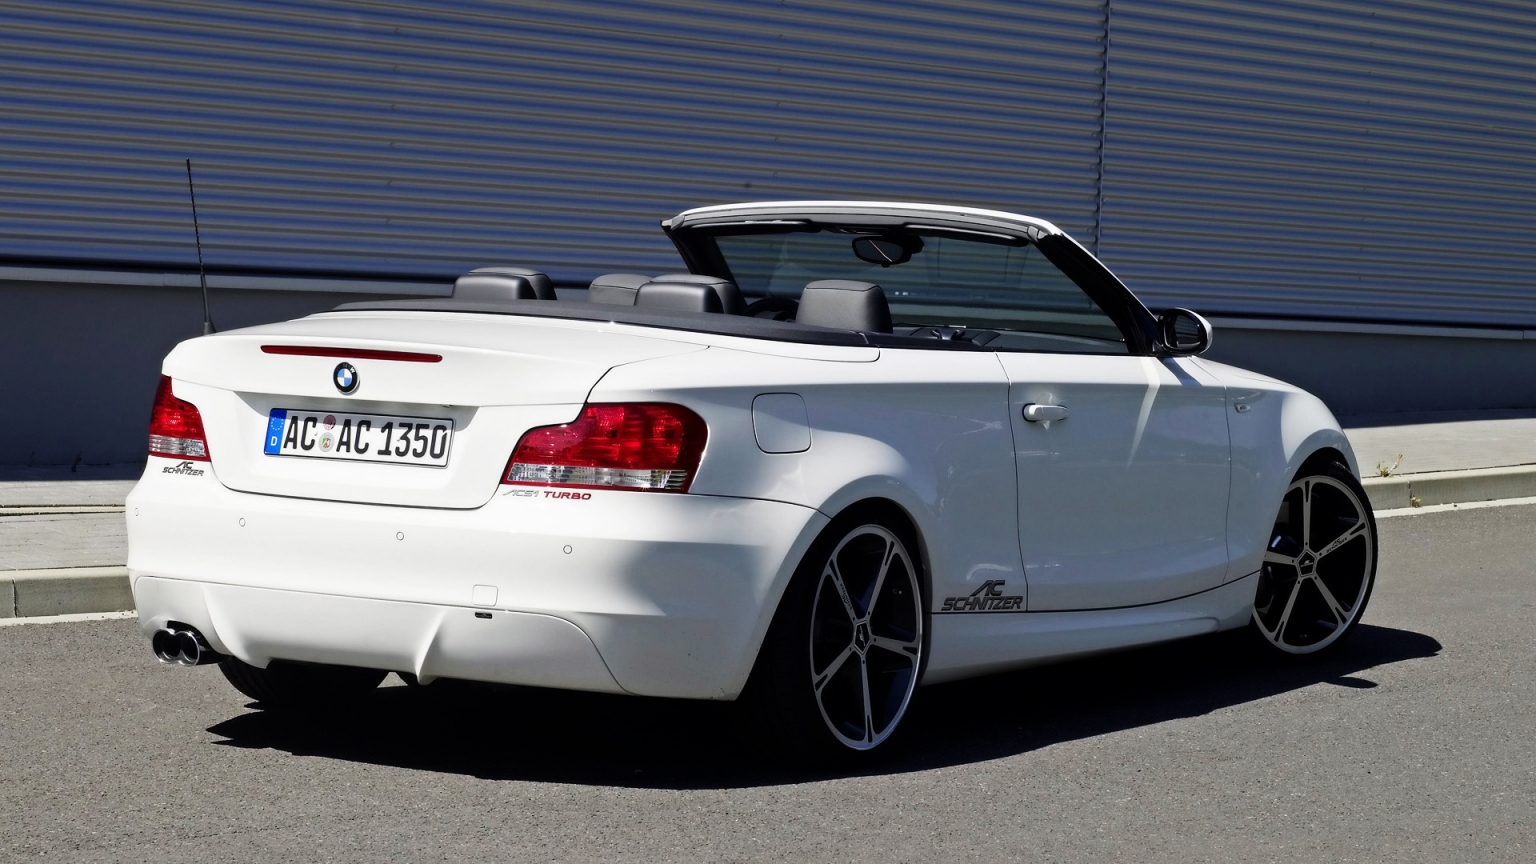 BMW 1 Series Convertible Rear Angle for 1536 x 864 HDTV resolution